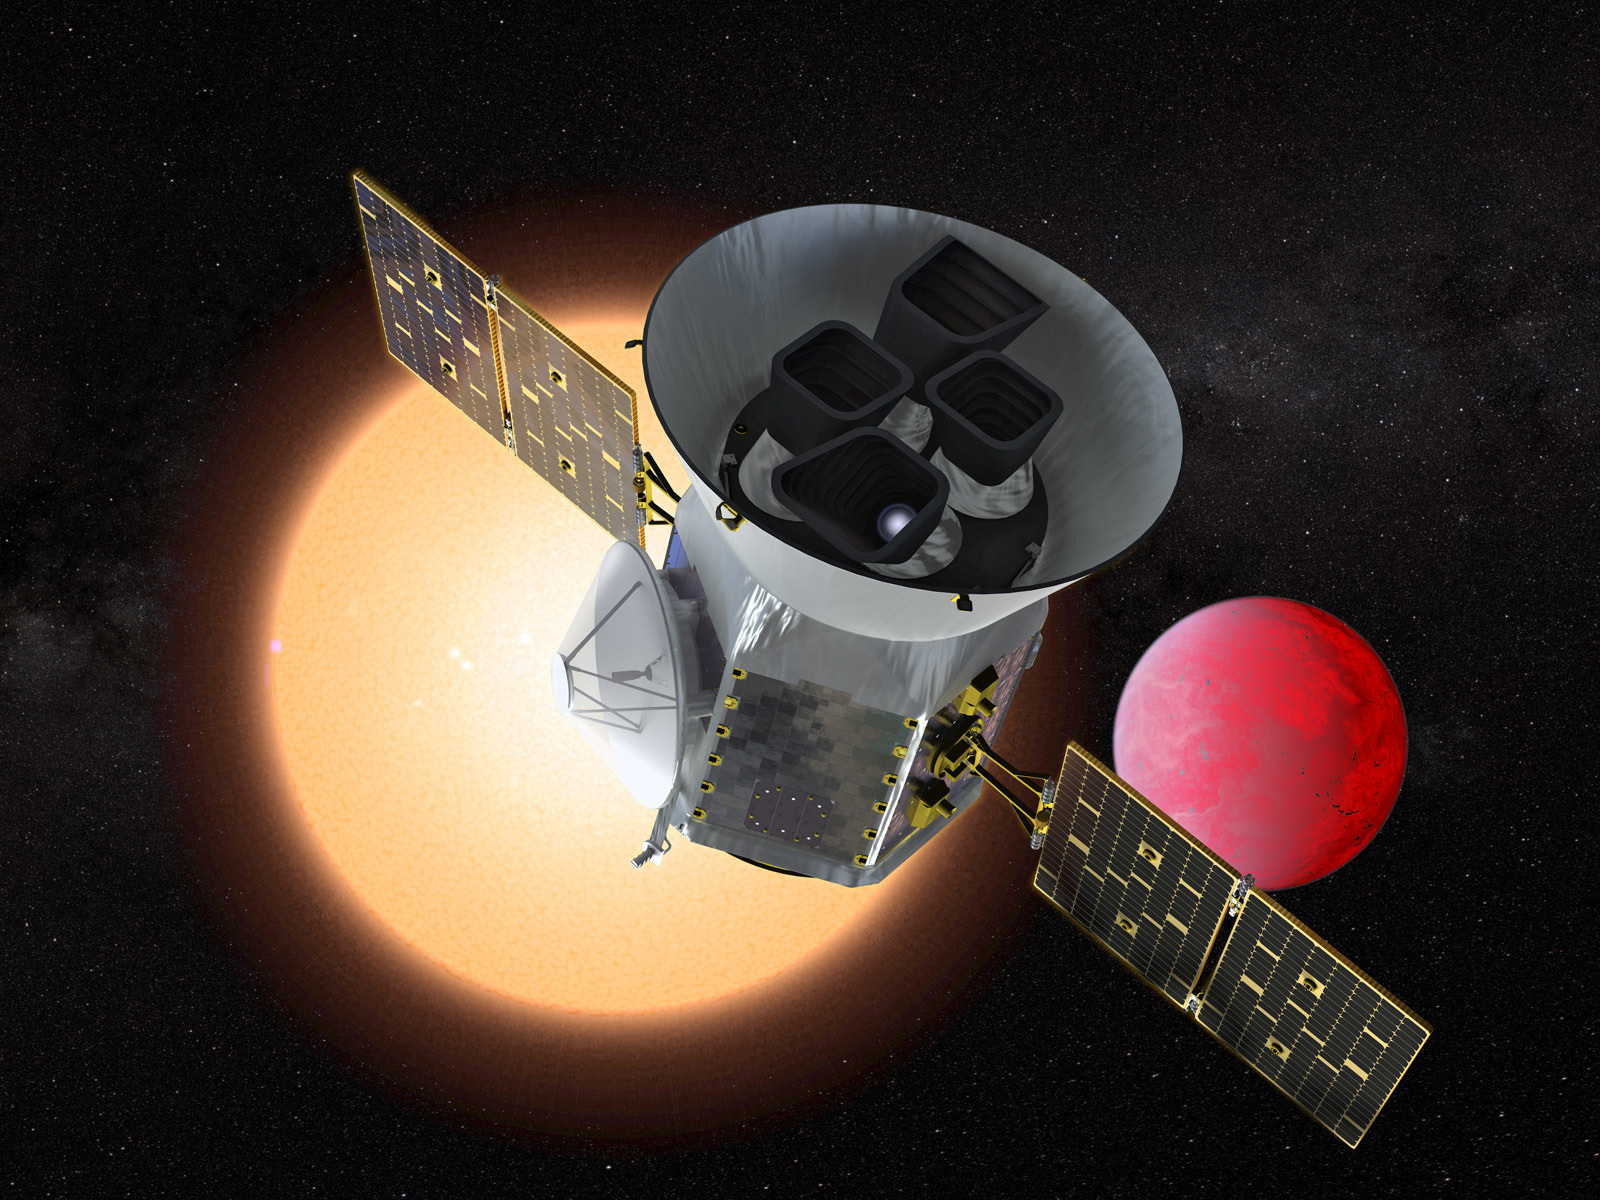 Illustration of spacecraft, distant star and lava planet.